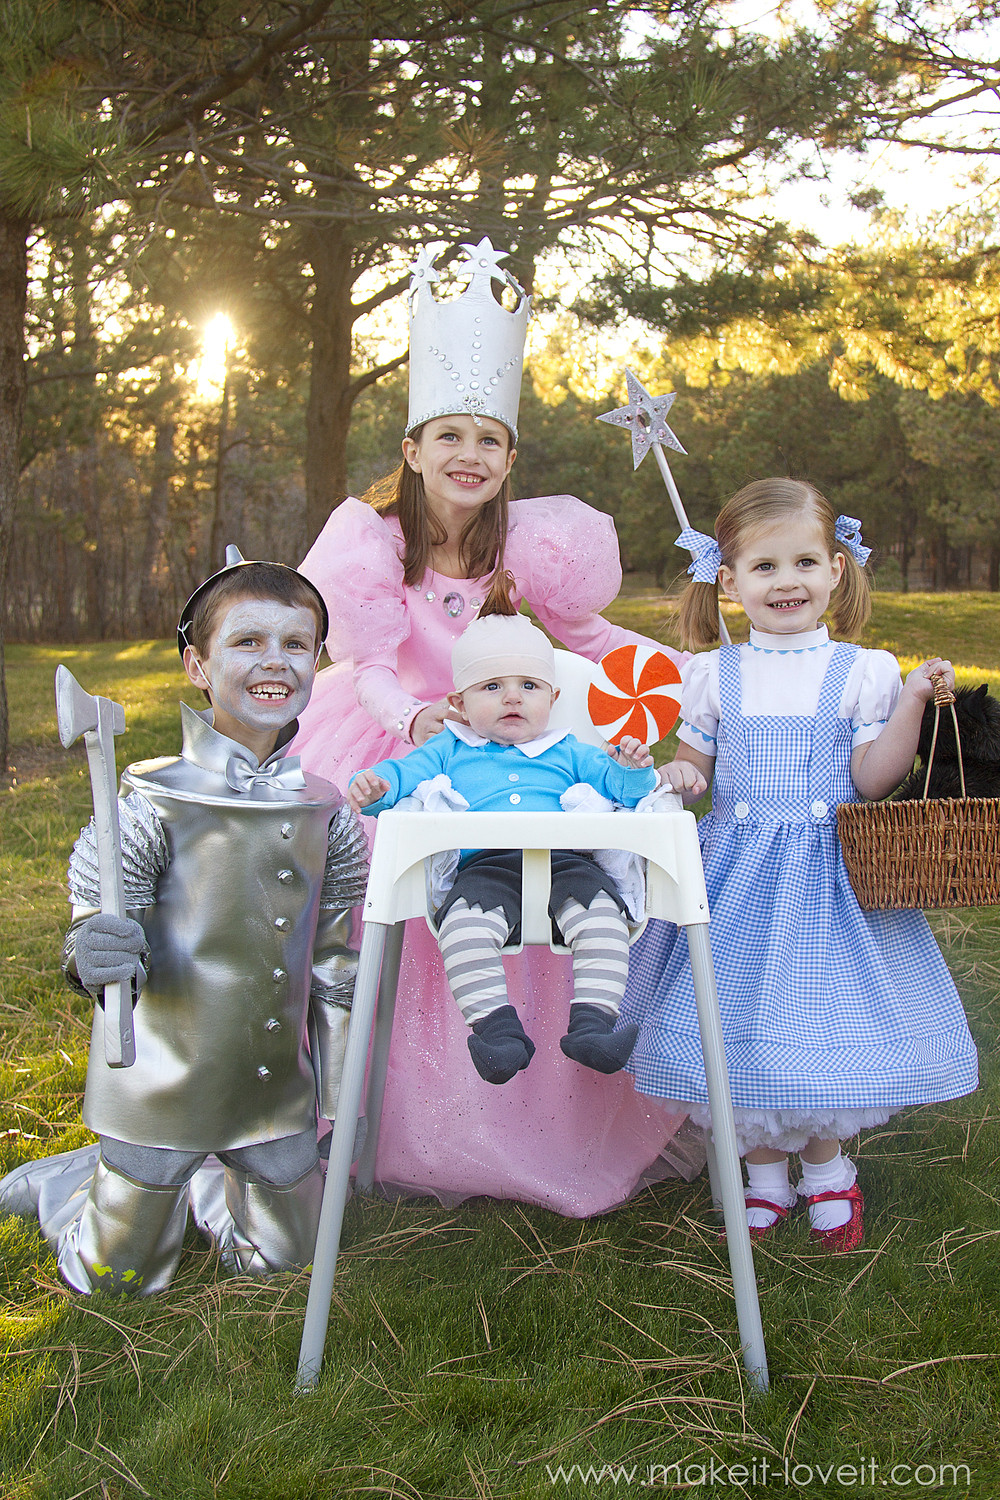 DIY Wizard Of Oz Costume
 Halloween Costumes 2014 The whole "Wizard of Oz" gang